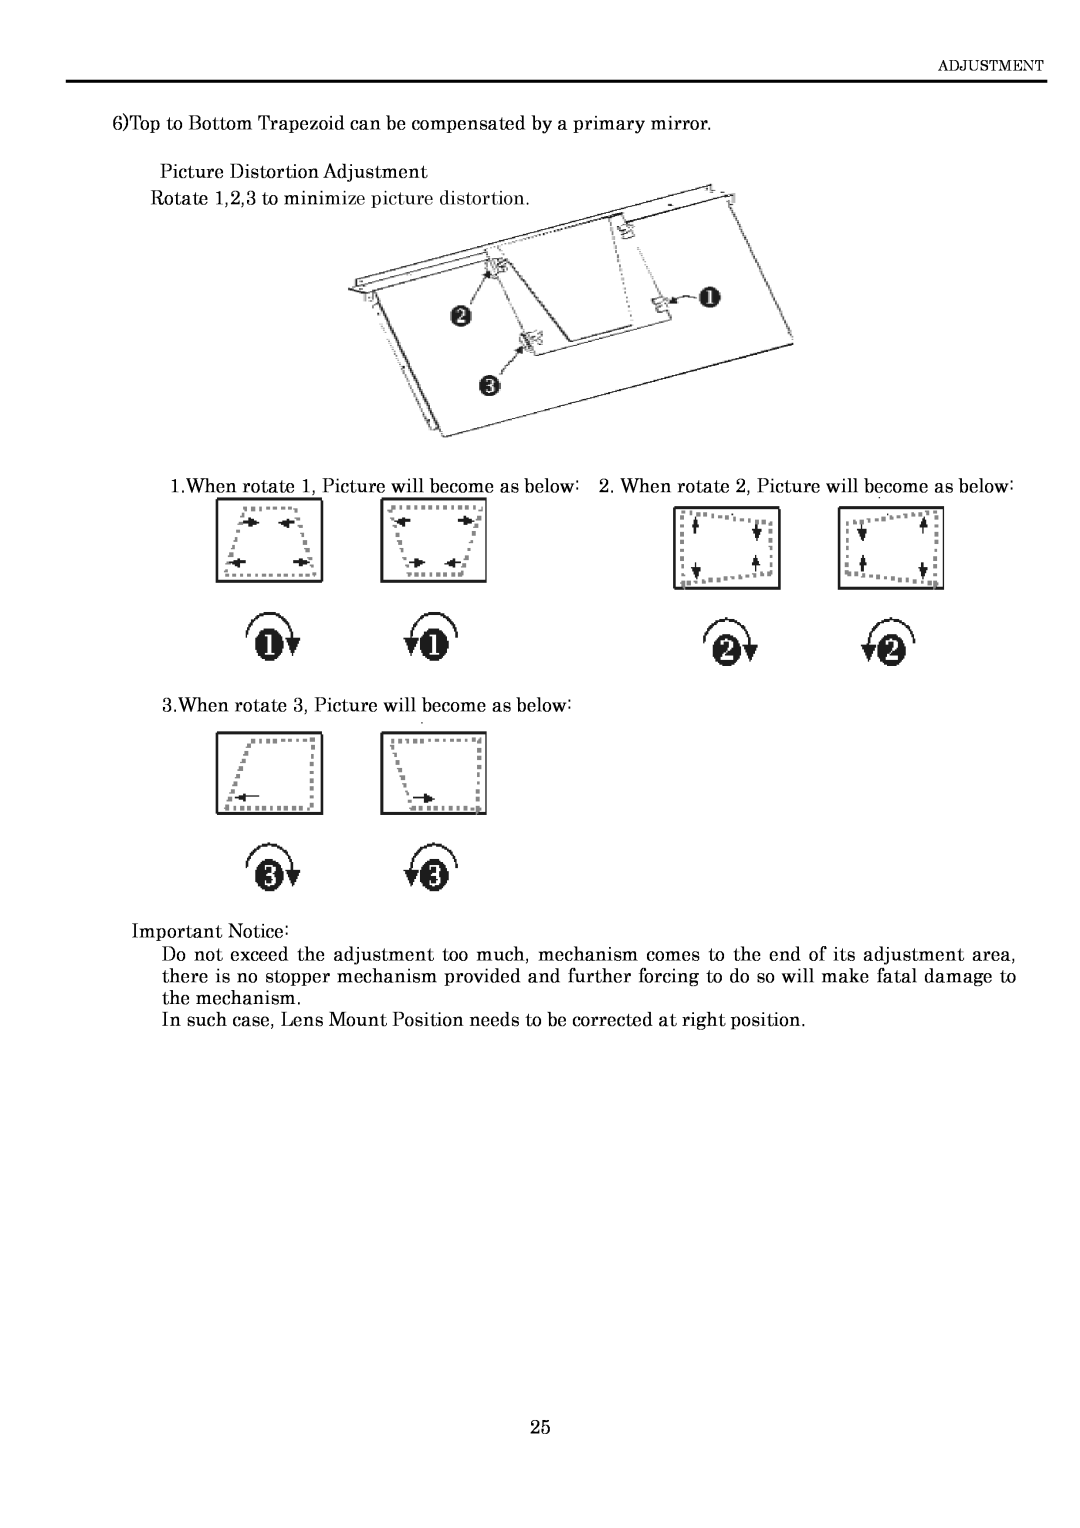 Toshiba P600DL service manual 6Top to Bottom Trapezoid can be compensated by a primary mirror 